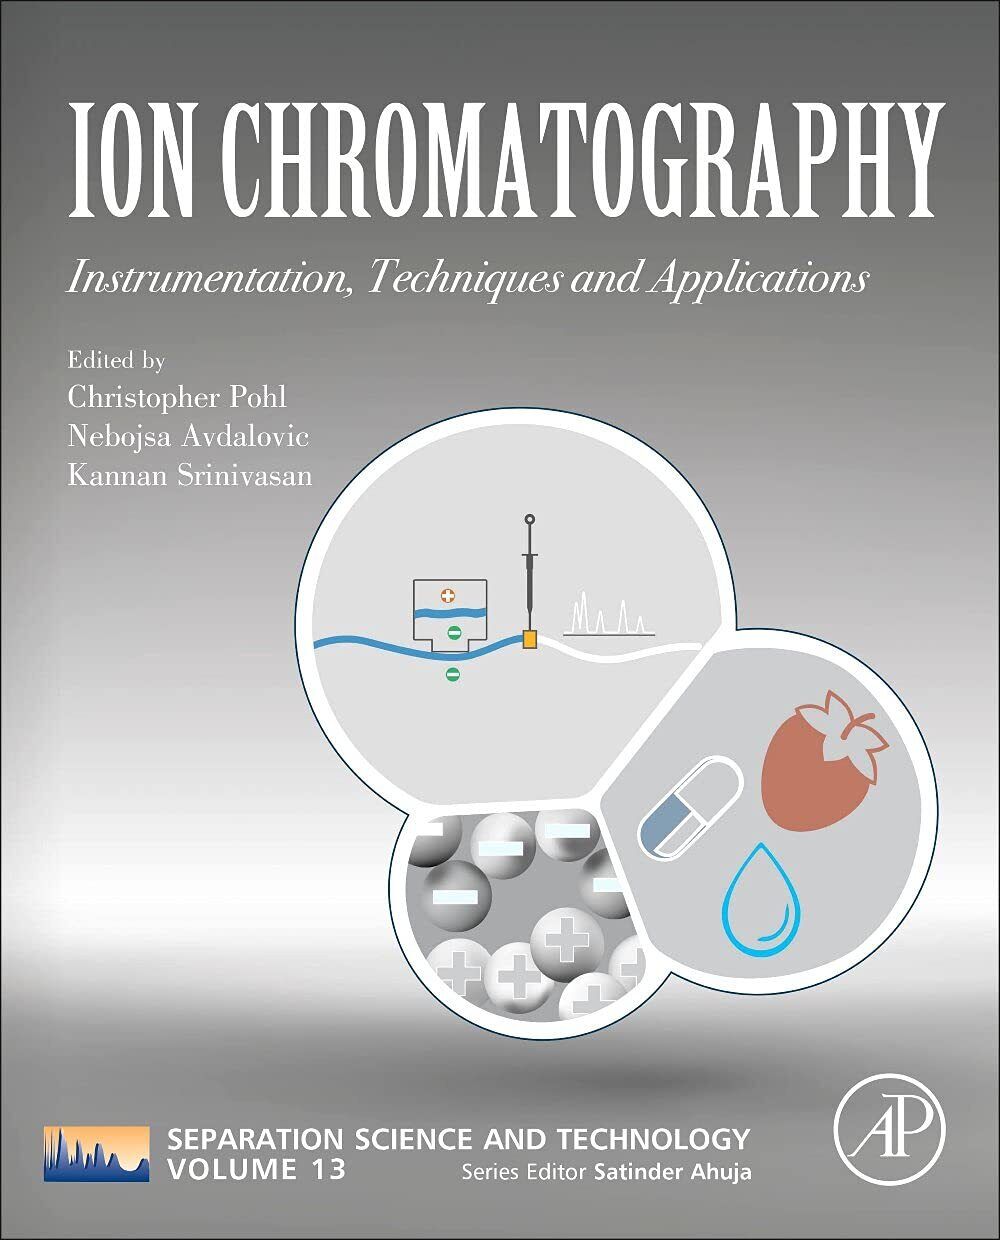 Ion Chromatography - Christopher A. Pohl - Academic, 2021